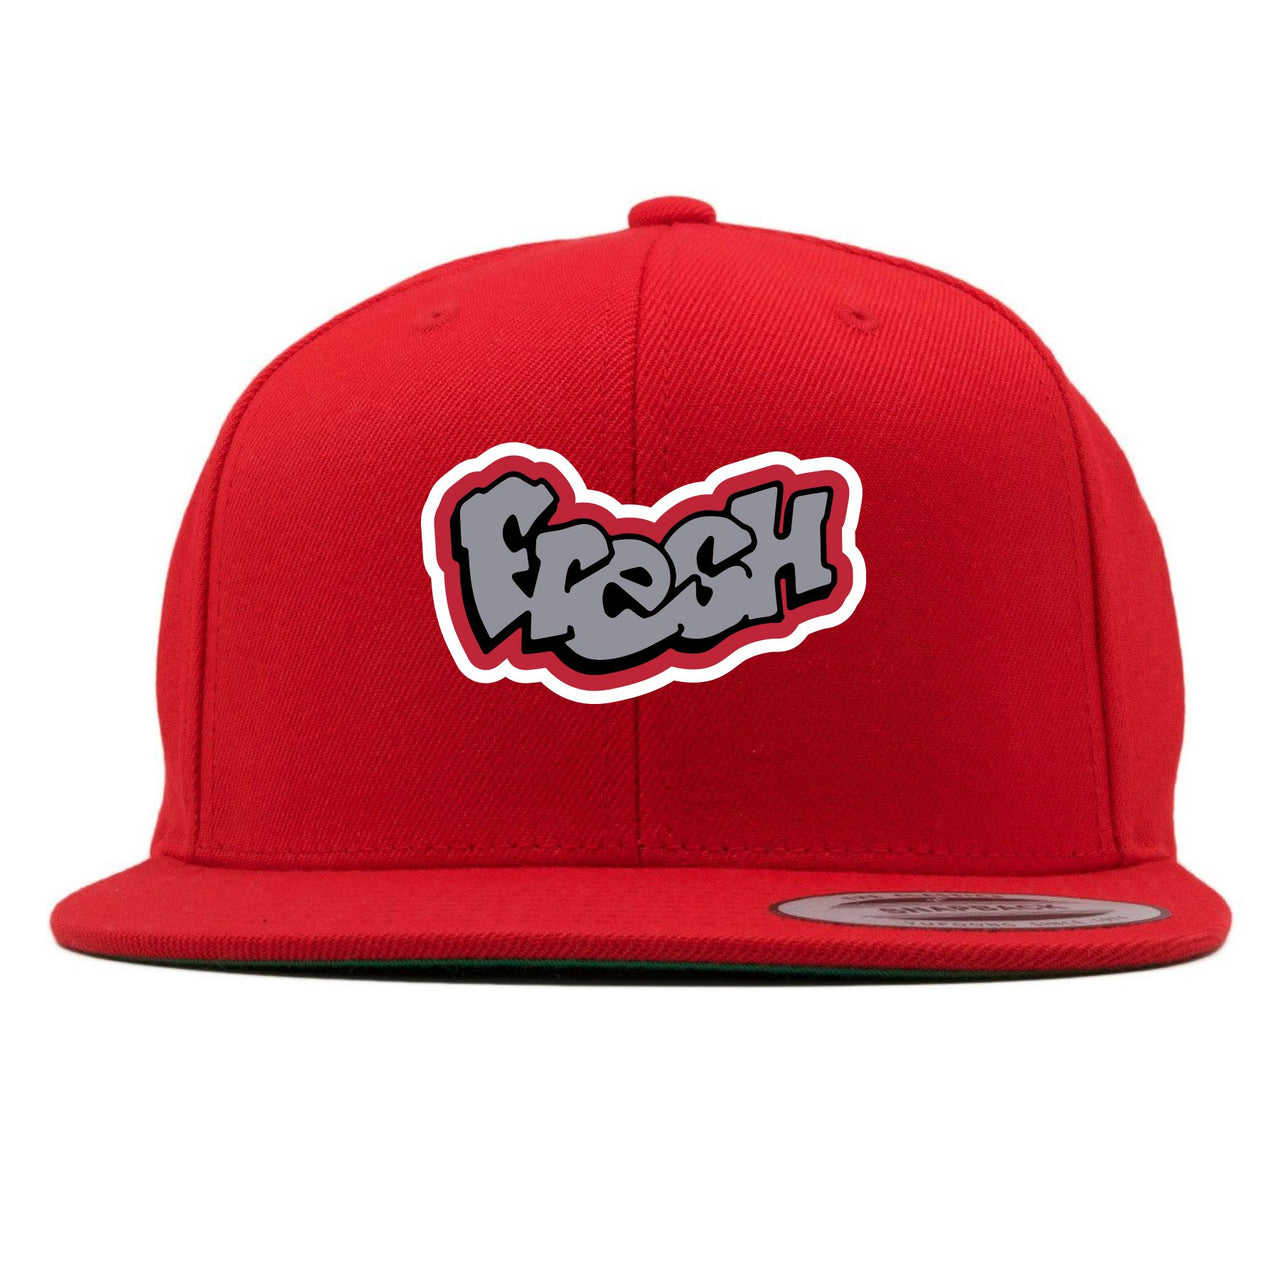 Reflections of a Champion 8s Snapback | Fresh Logo, Red